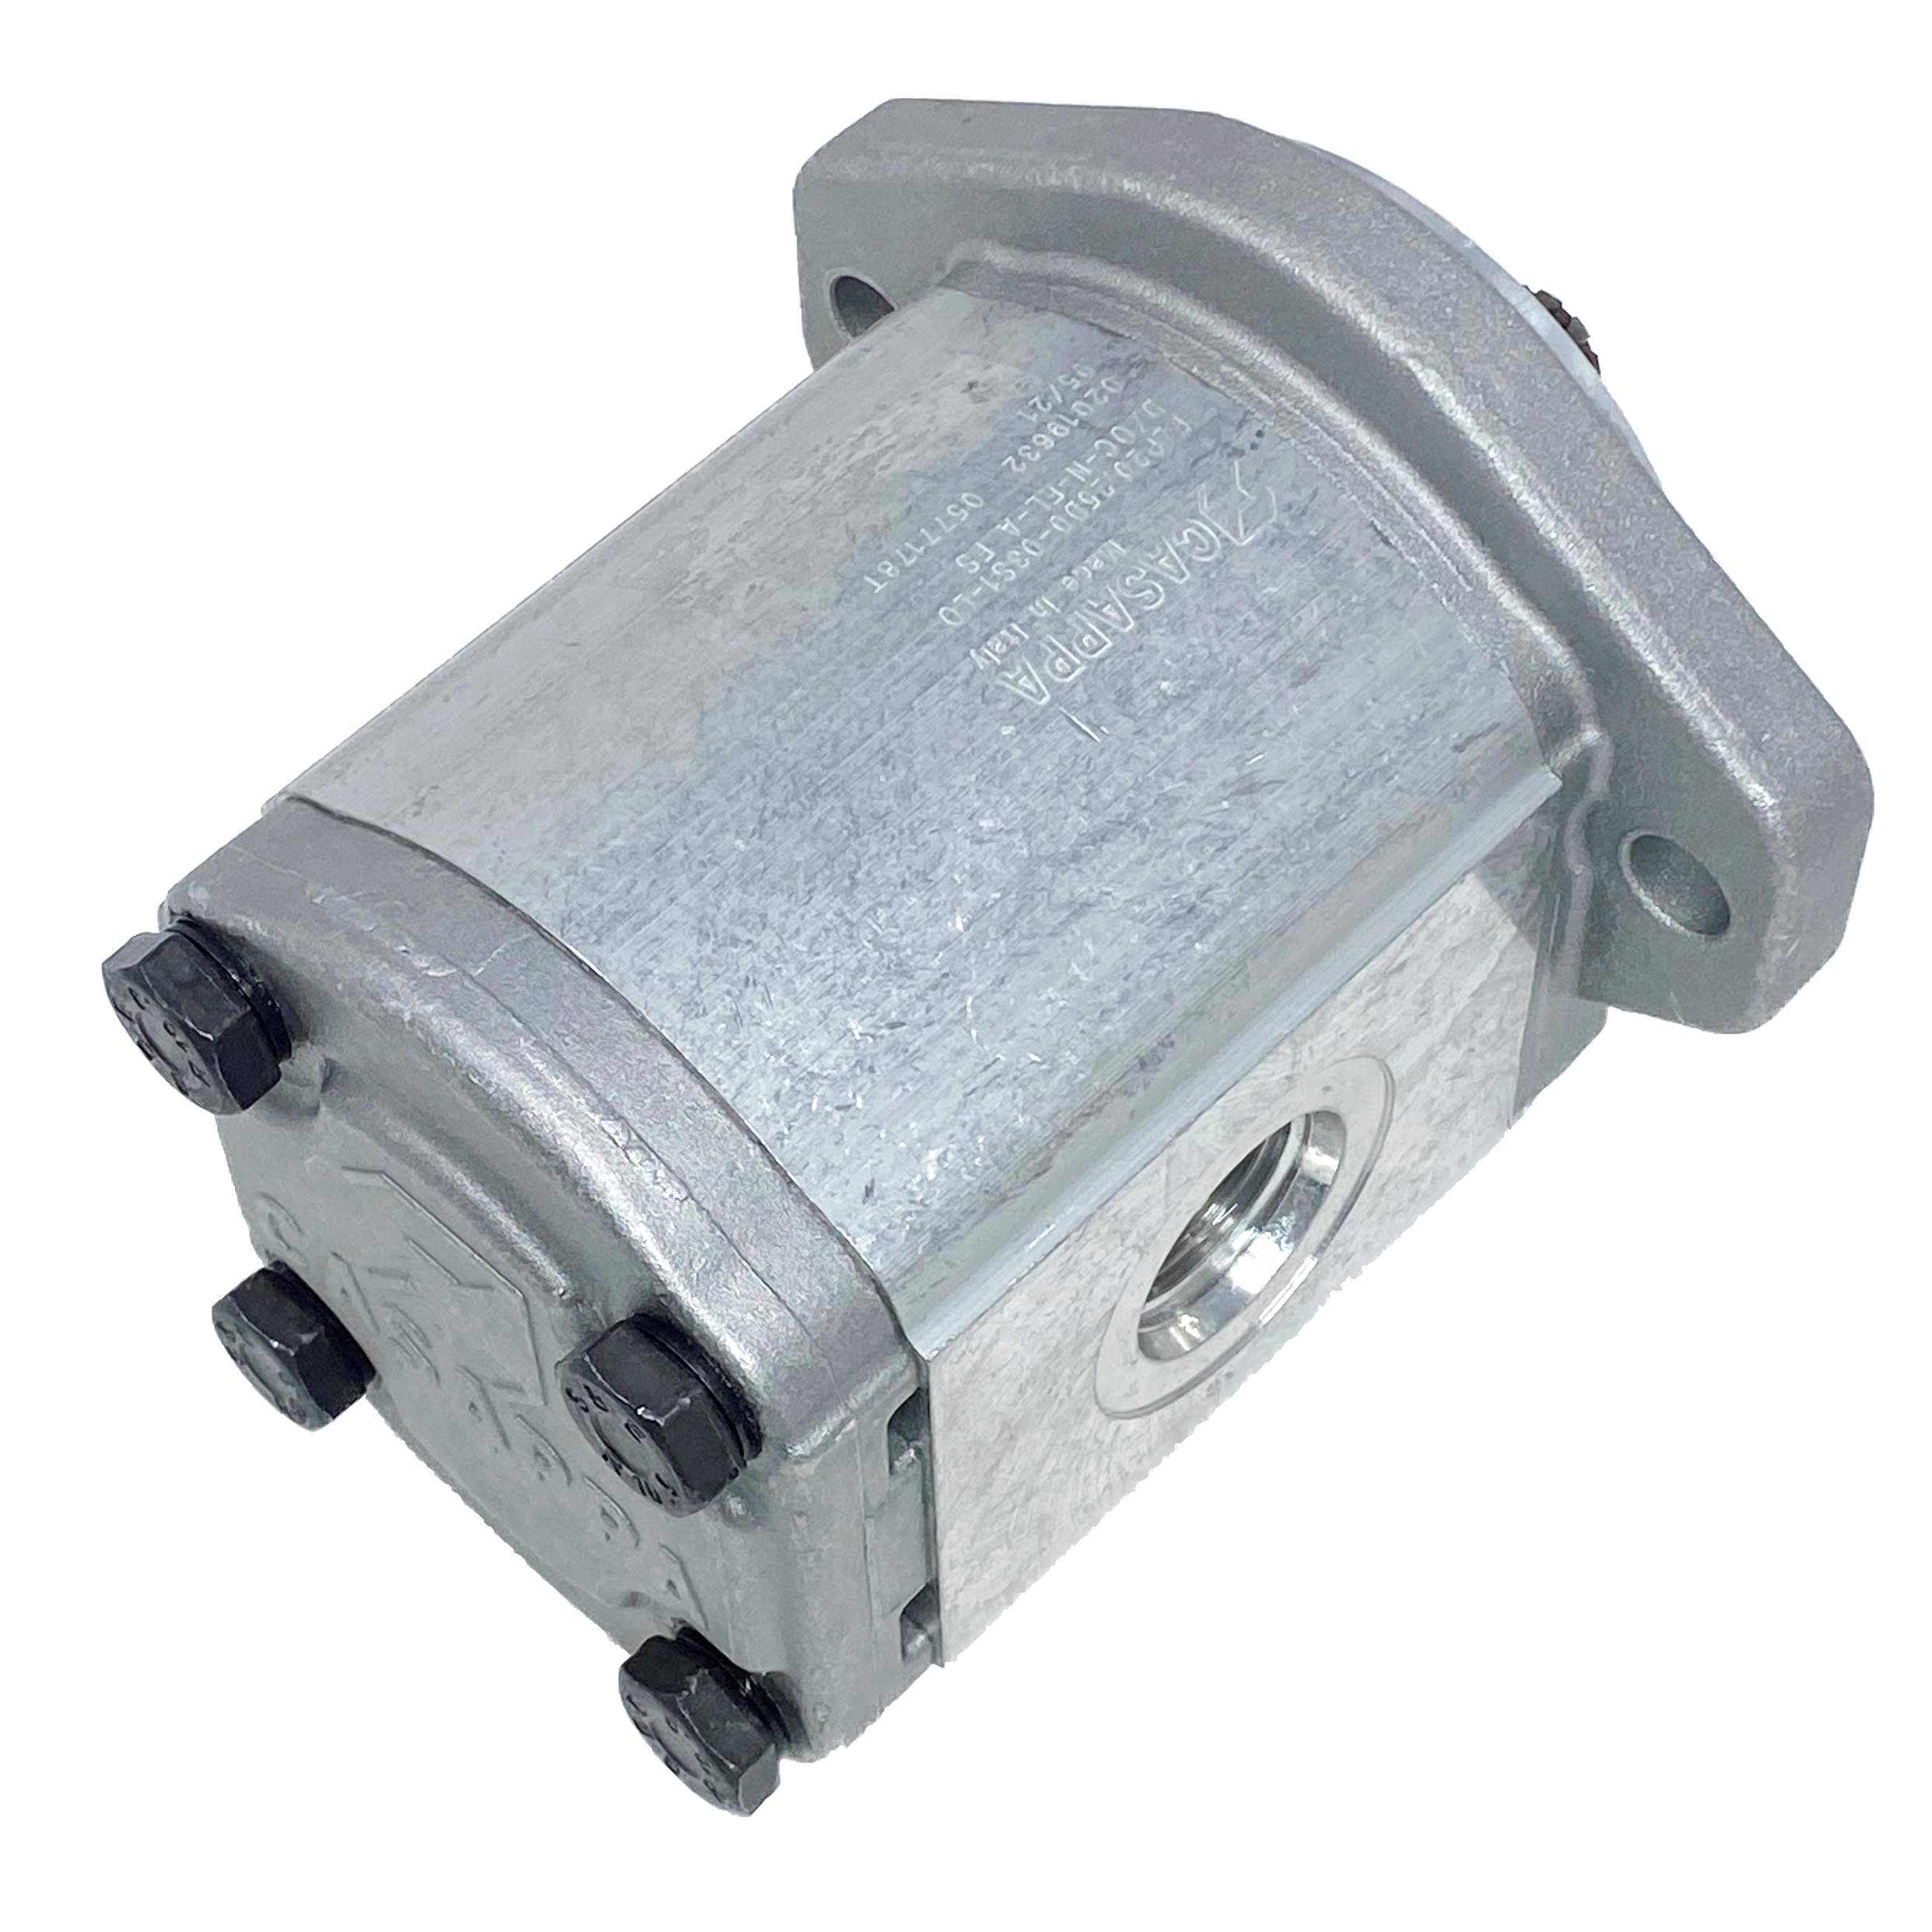 PHM20.27,8B0-03S9-LOC/OG-N-EL : Casappa Polaris Gear Motor, 28.21cc, 2900psi Rated, 2500RPM, Reversible Interior Drain, 9T 16/32dp Shaft, SAE A 2-Bolt Flange, 0.625 (5/8") #10 SAE Inlet, 1.25" #20 SAE Outlet, Cast Iron Body, Aluminum Flange